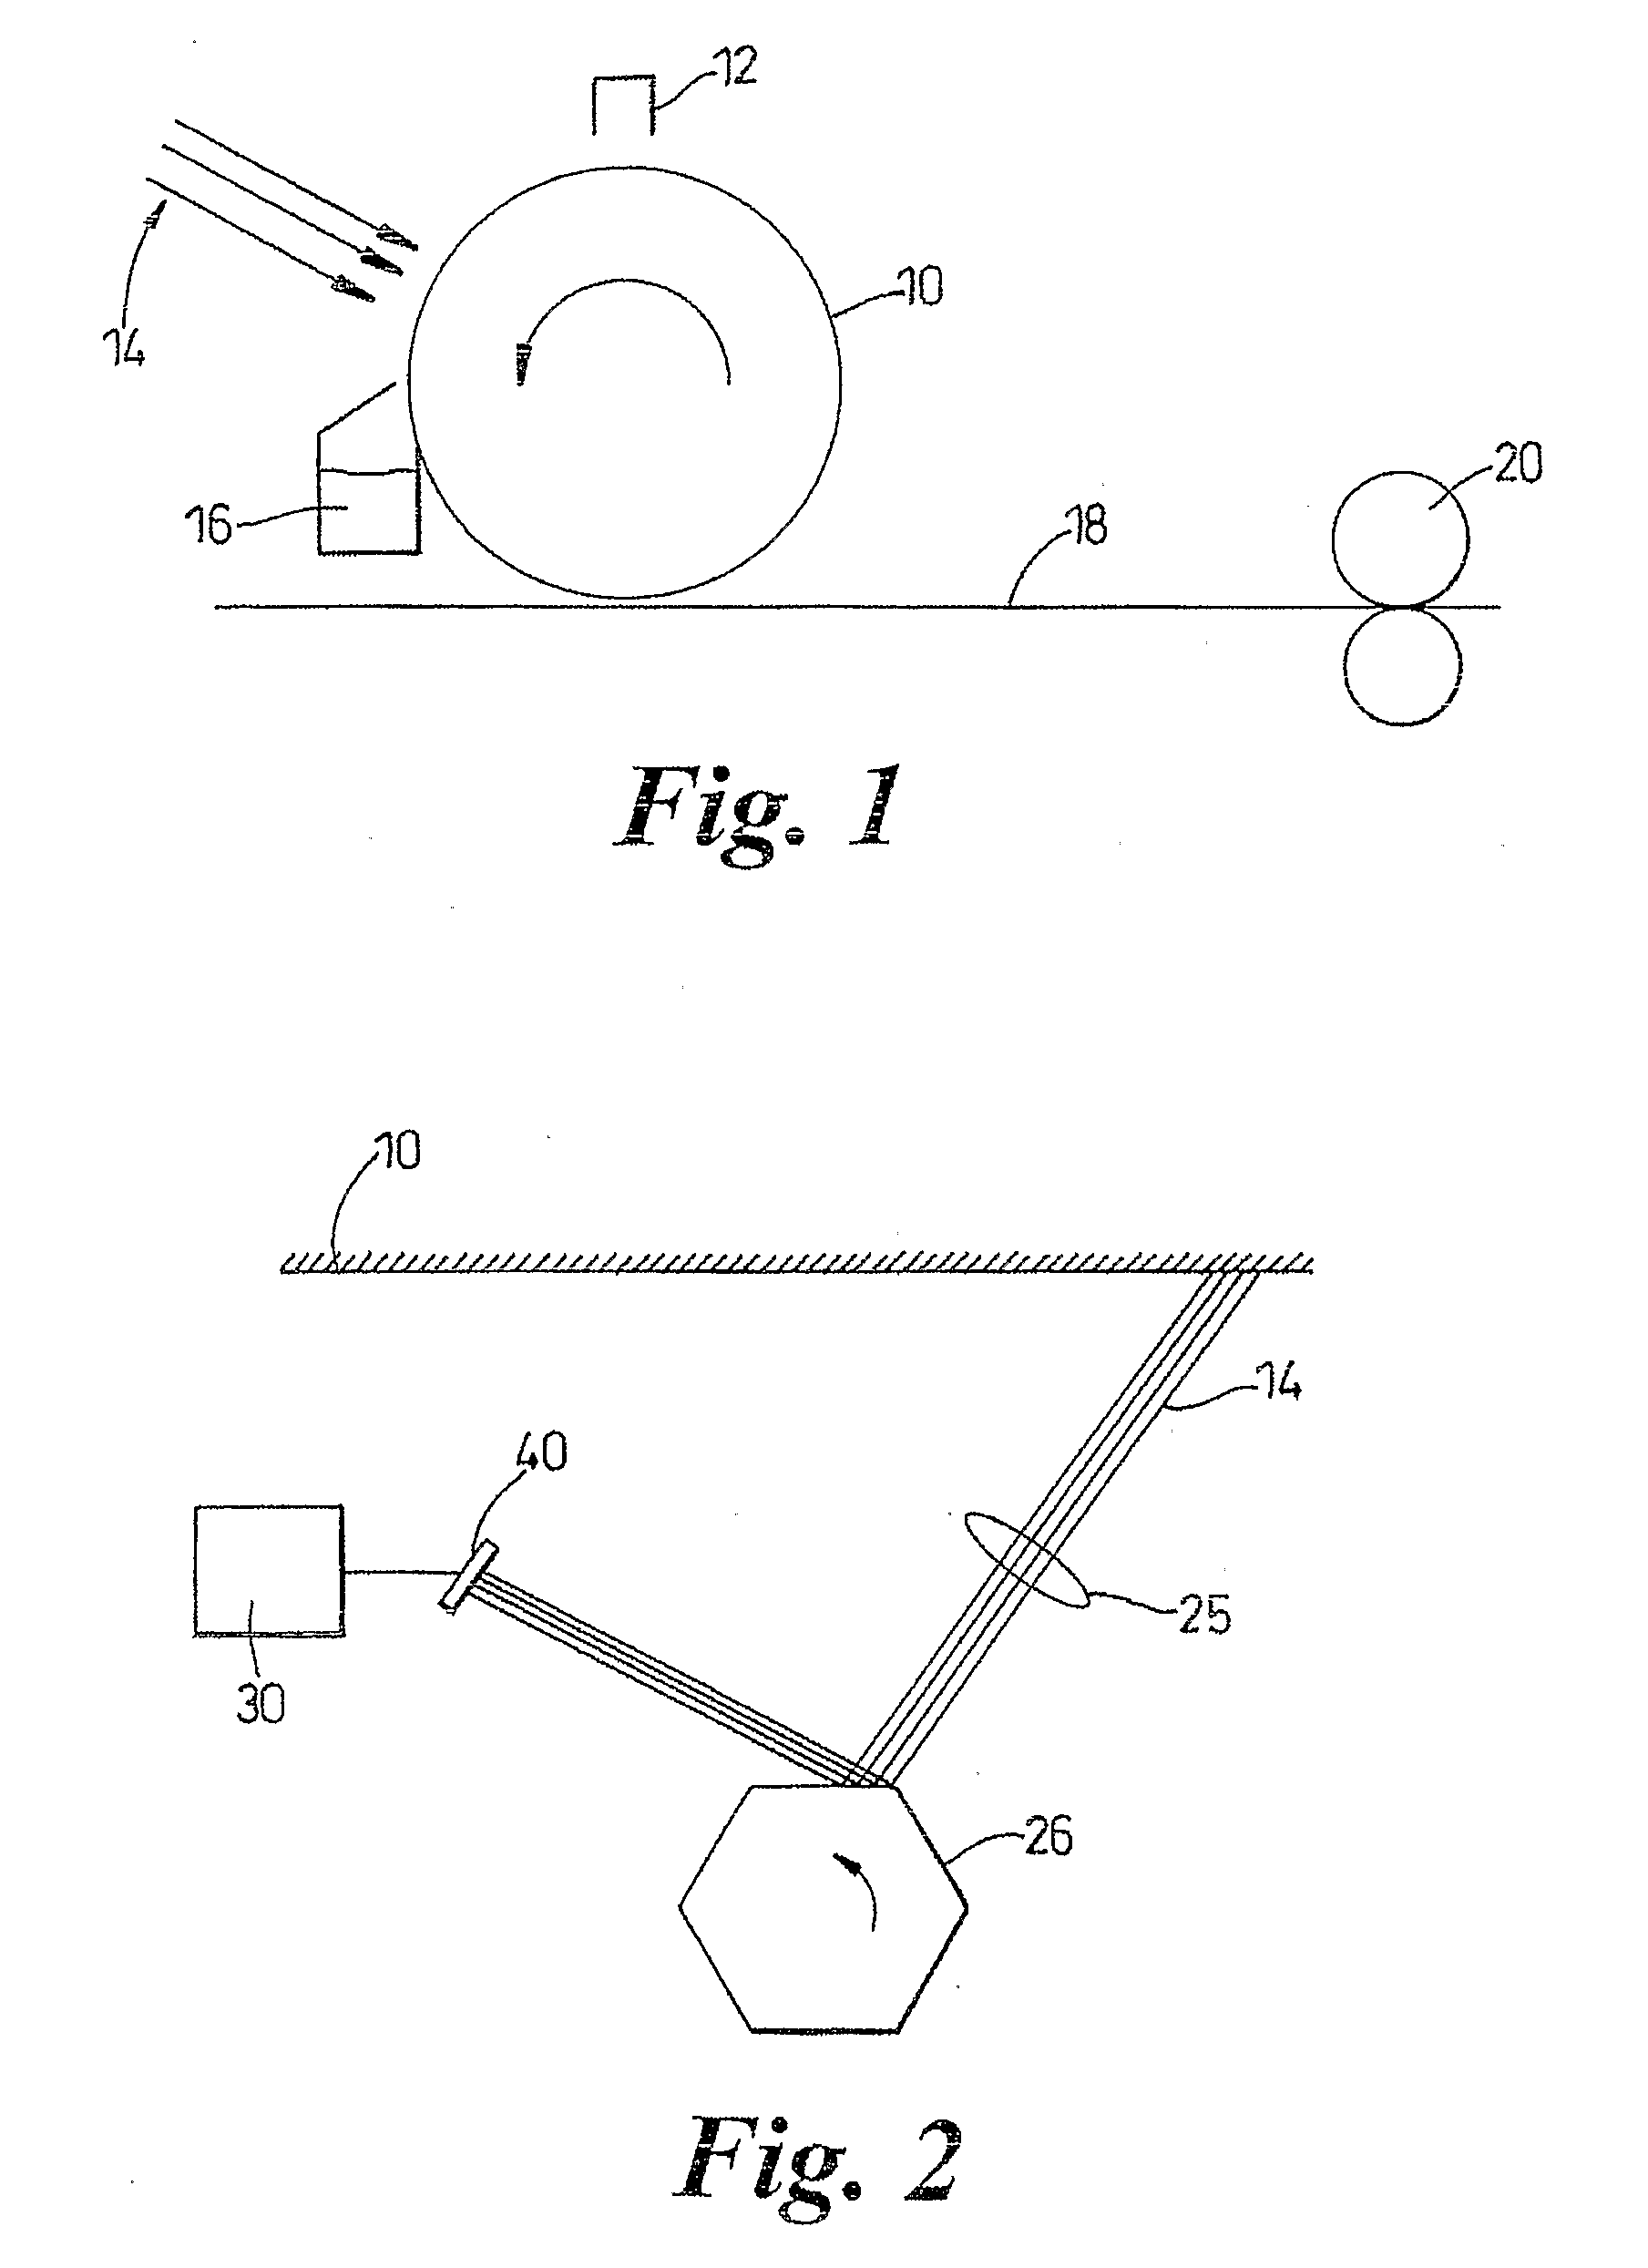 Apparatus and method of reducing banding artifact visibility in a scanning apparatus